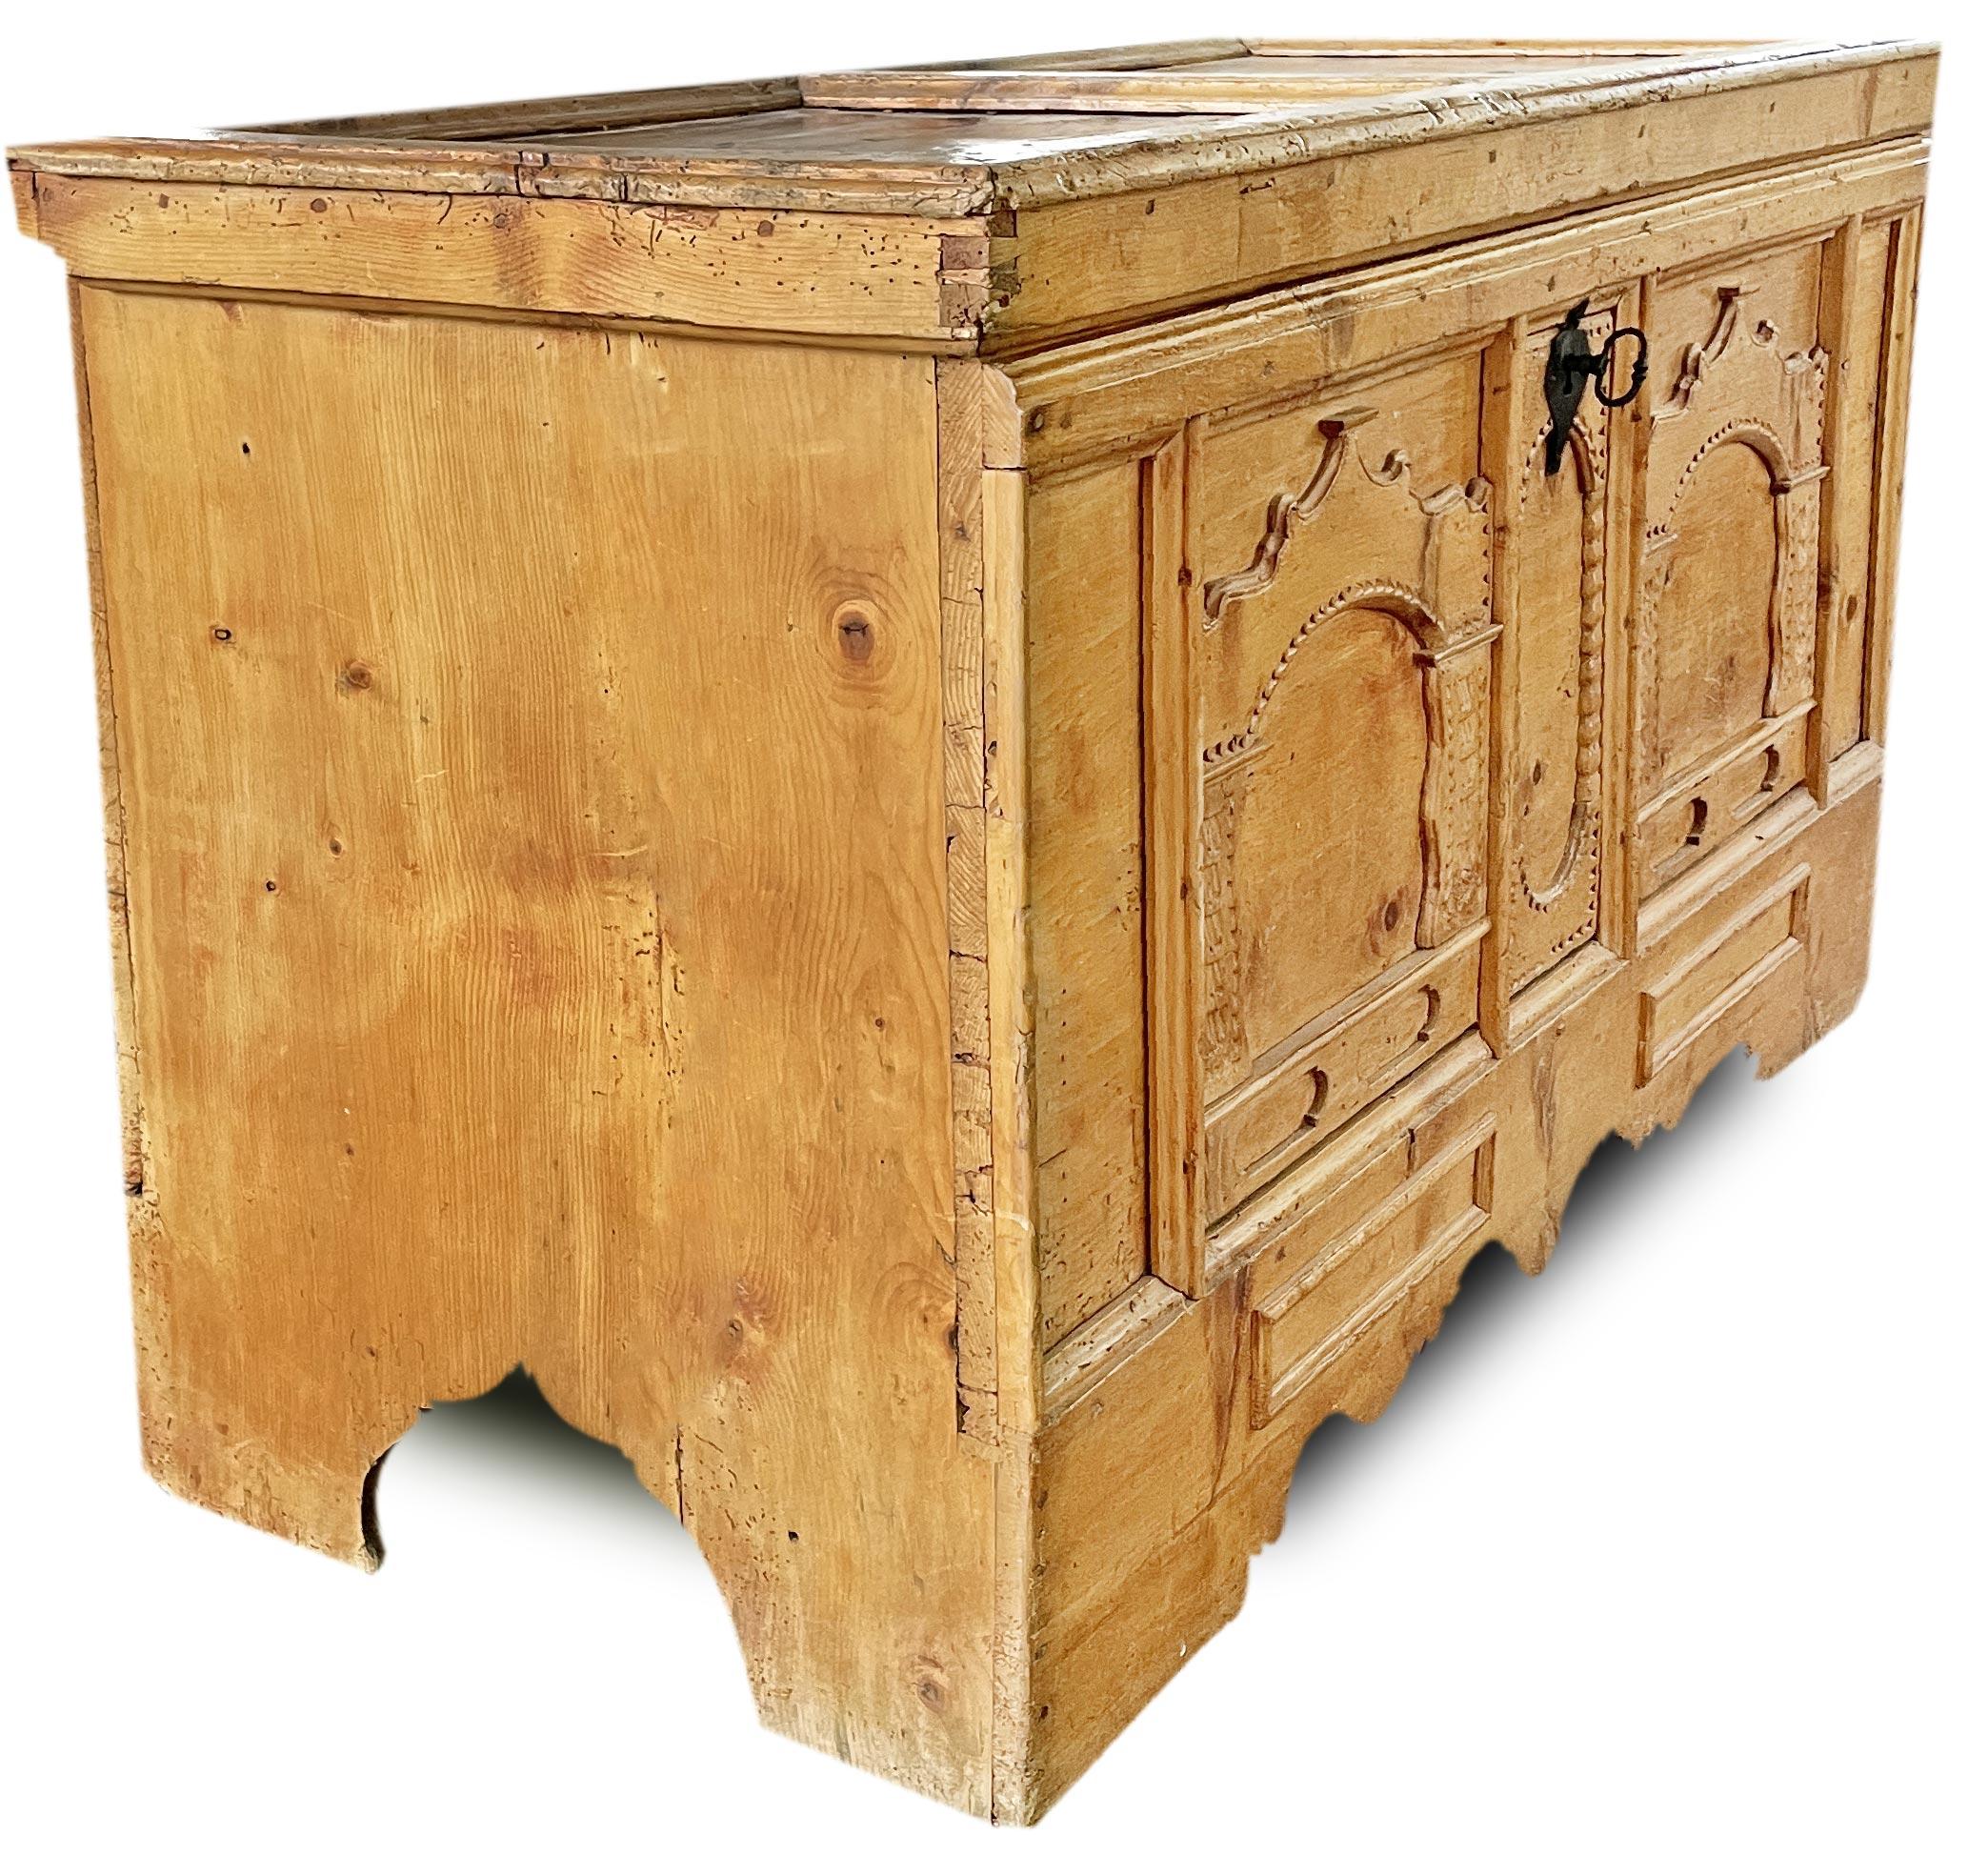 Fir Late 18th Century Swiss Pine Blanket Chest For Sale